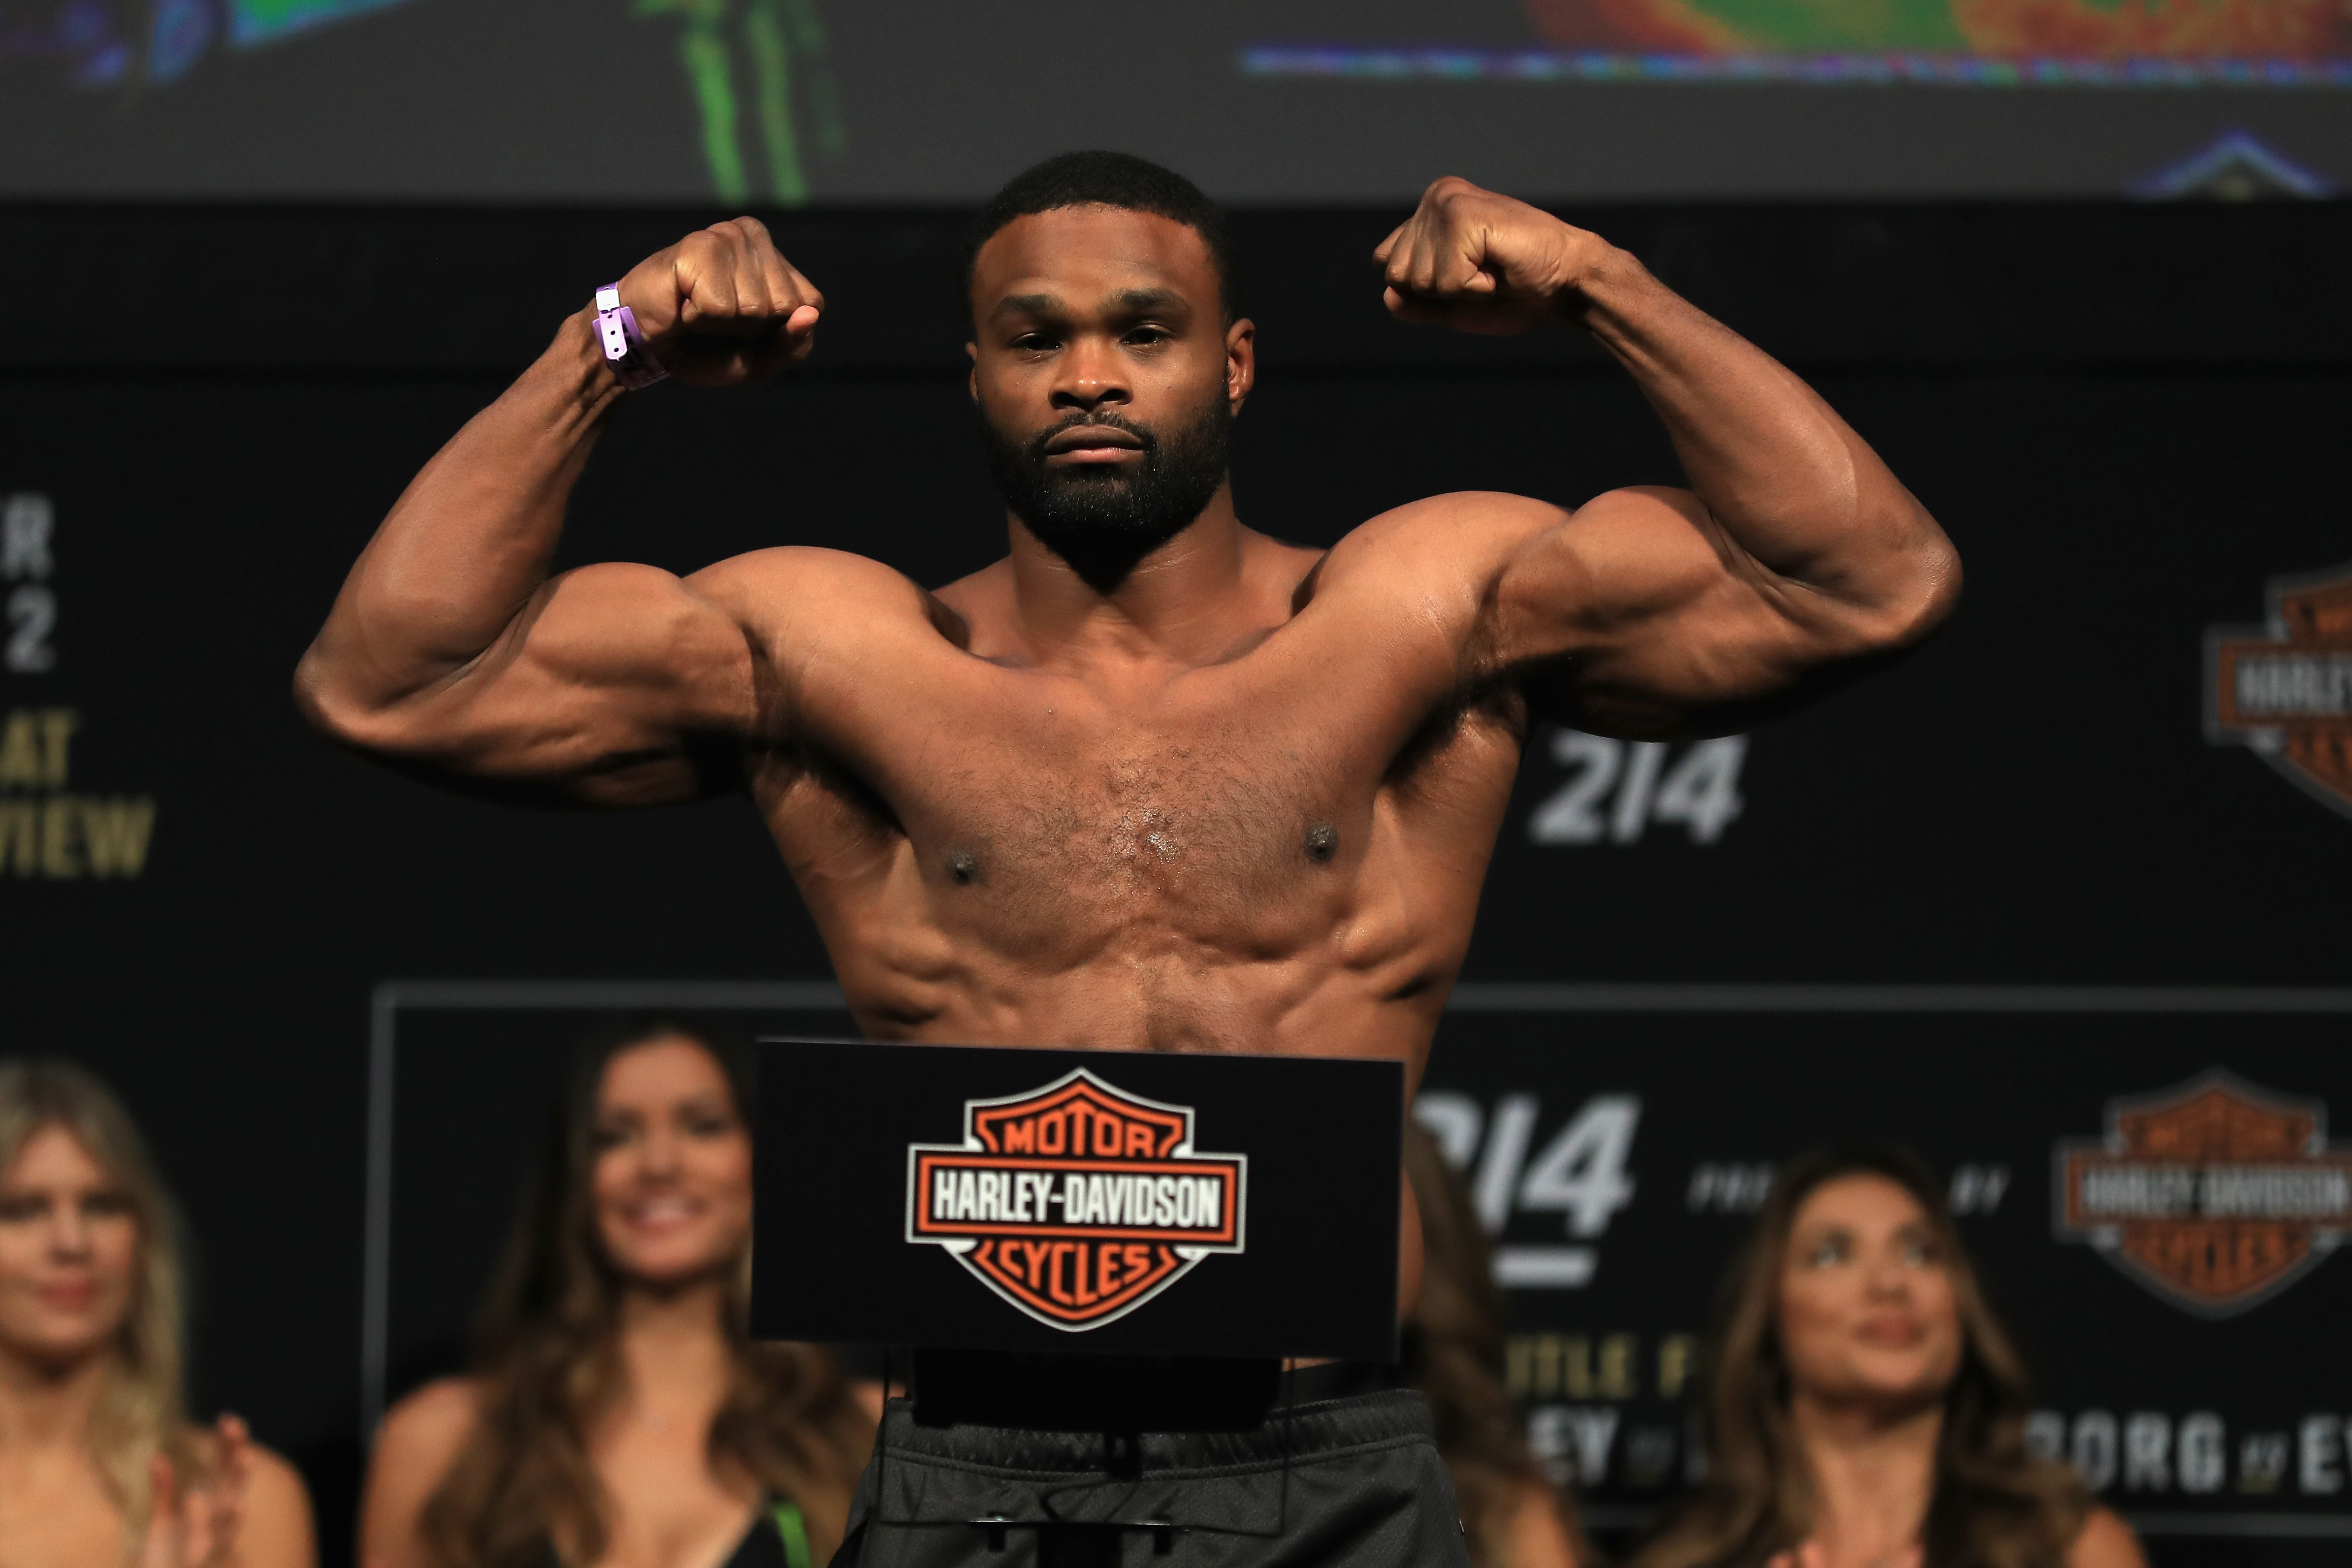 ANAHEIM, CA - JULY 28: (L_R) Tyrone Woodley poses on the scale during the UFC 214 weigh-in at Honda Center on July 28, 2017 in Anaheim, California. Woodley will fight Demian Maia in a welterweight title bout on July 28, 2017 in Anaheim, California. (Photo by Sean M. Haffey/Getty Images)